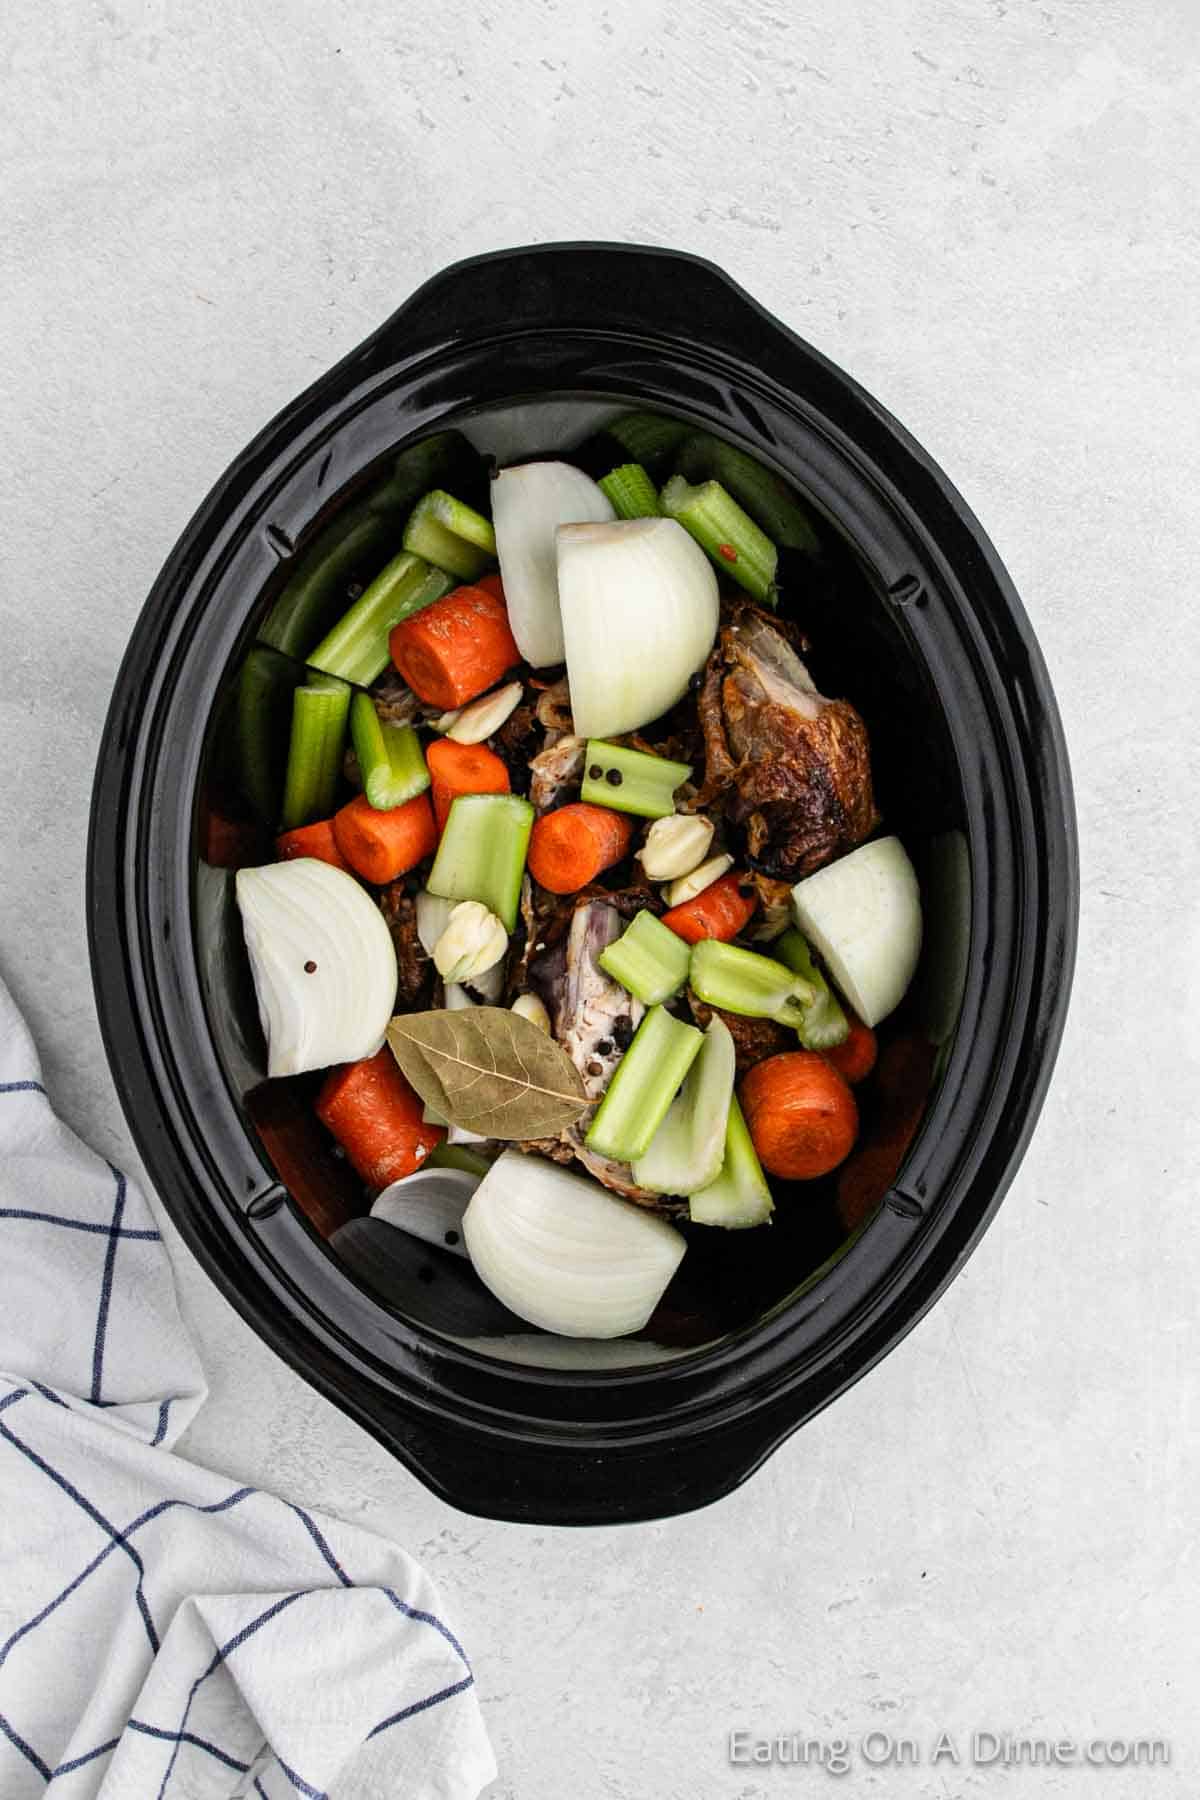 Adding the veggies to the slow cooker with carcass